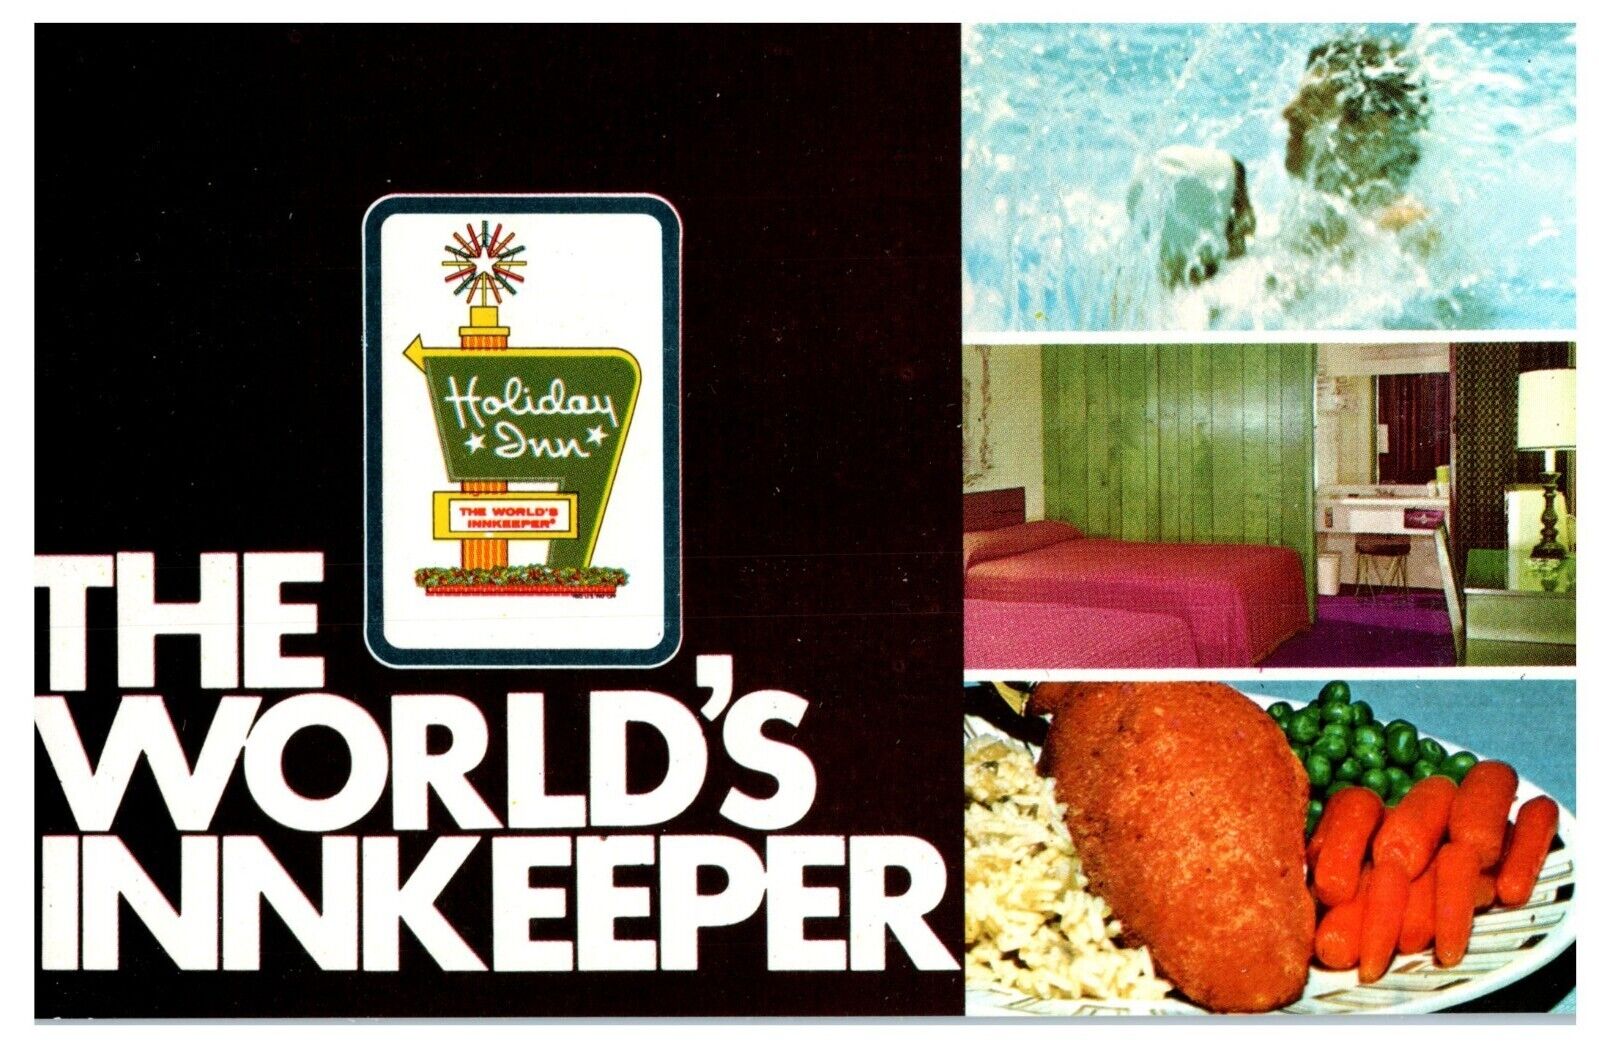 Foods, Room, The World\'s Inkeeper, Holiday Inn of Cookeville, Tennessee Postcard